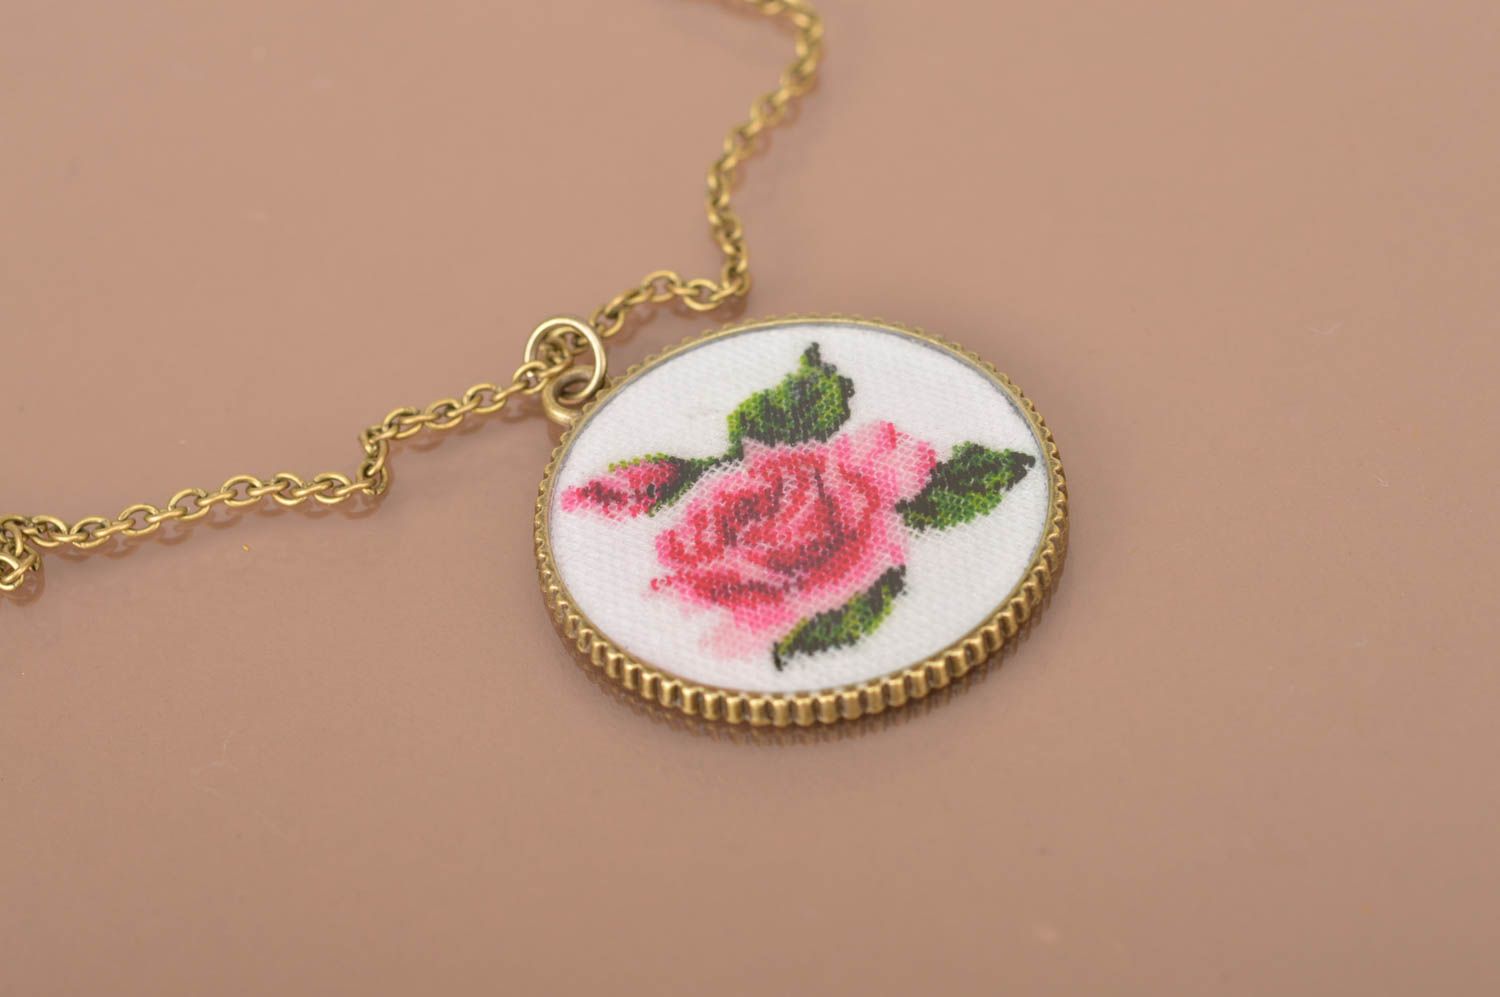 Flower jewelry pendant necklace designer accessories charm necklace gift ideas photo 3